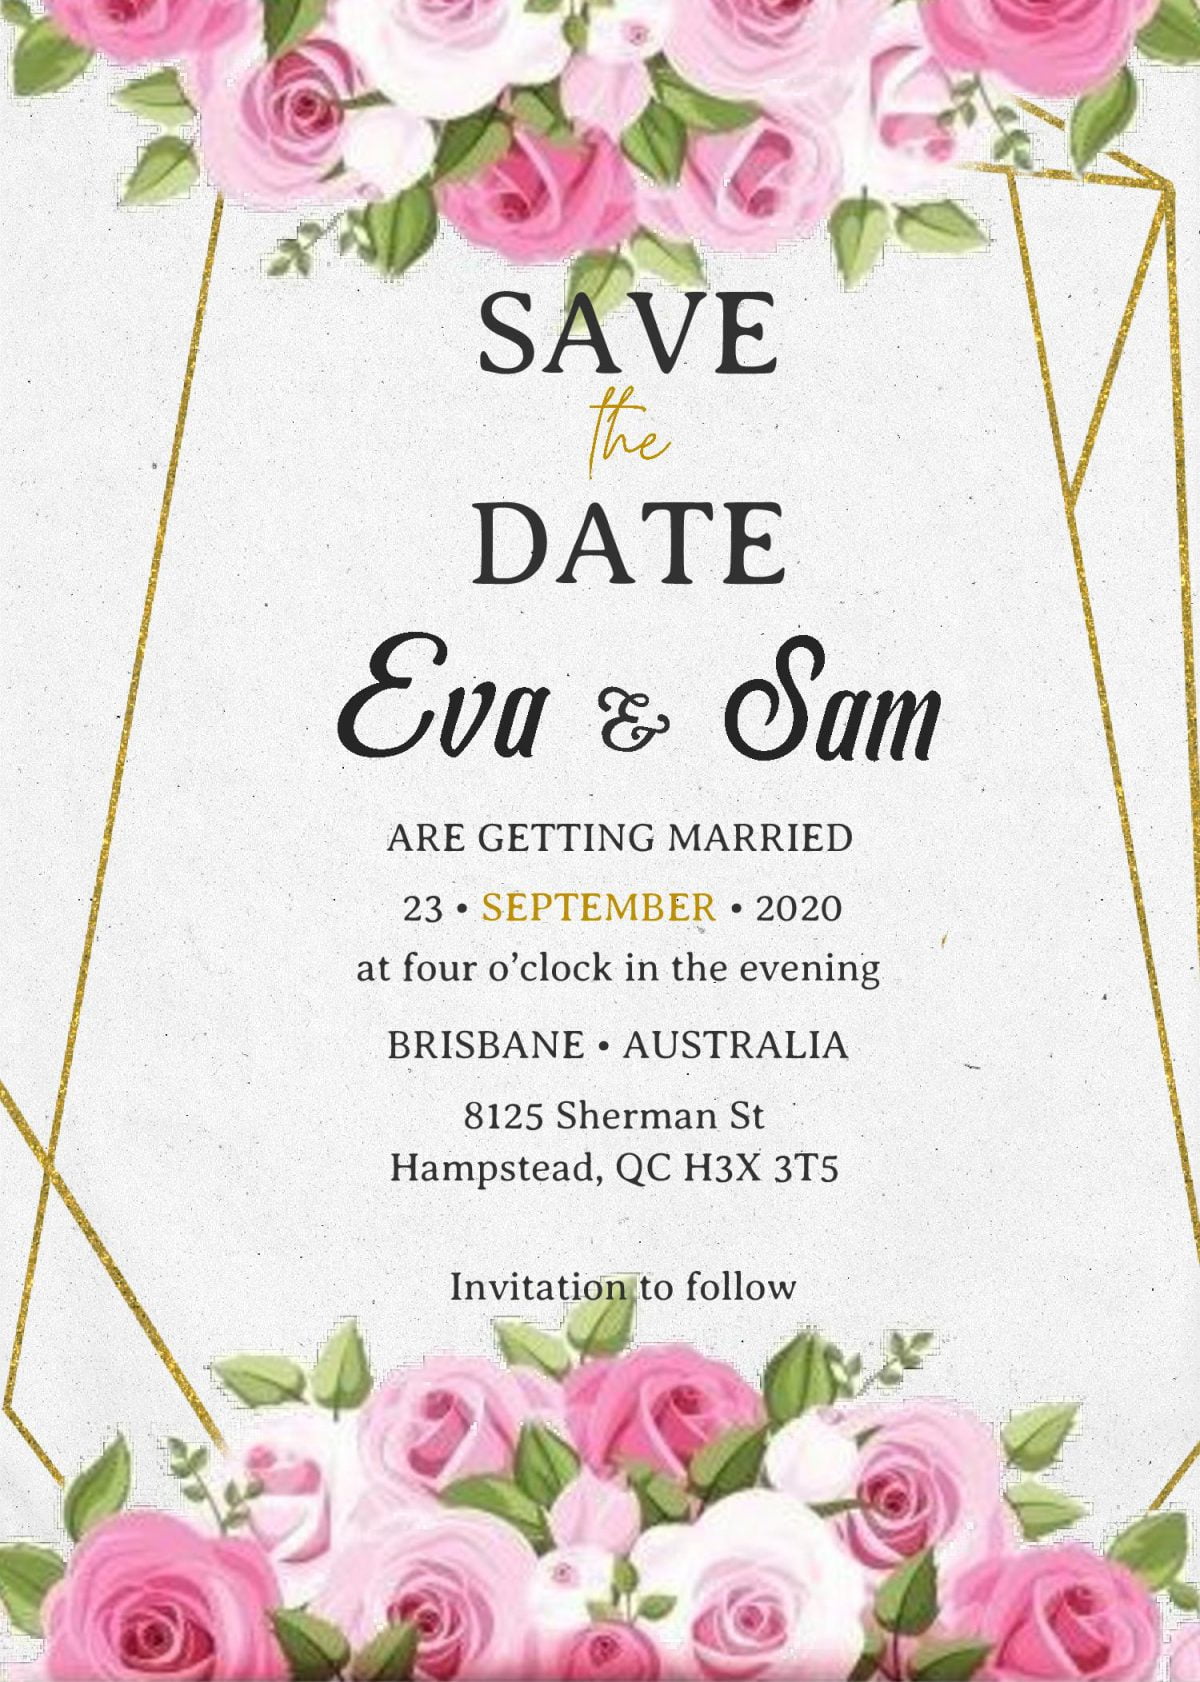 Save The Date Invitation Templates - Editable With MS Word and has 